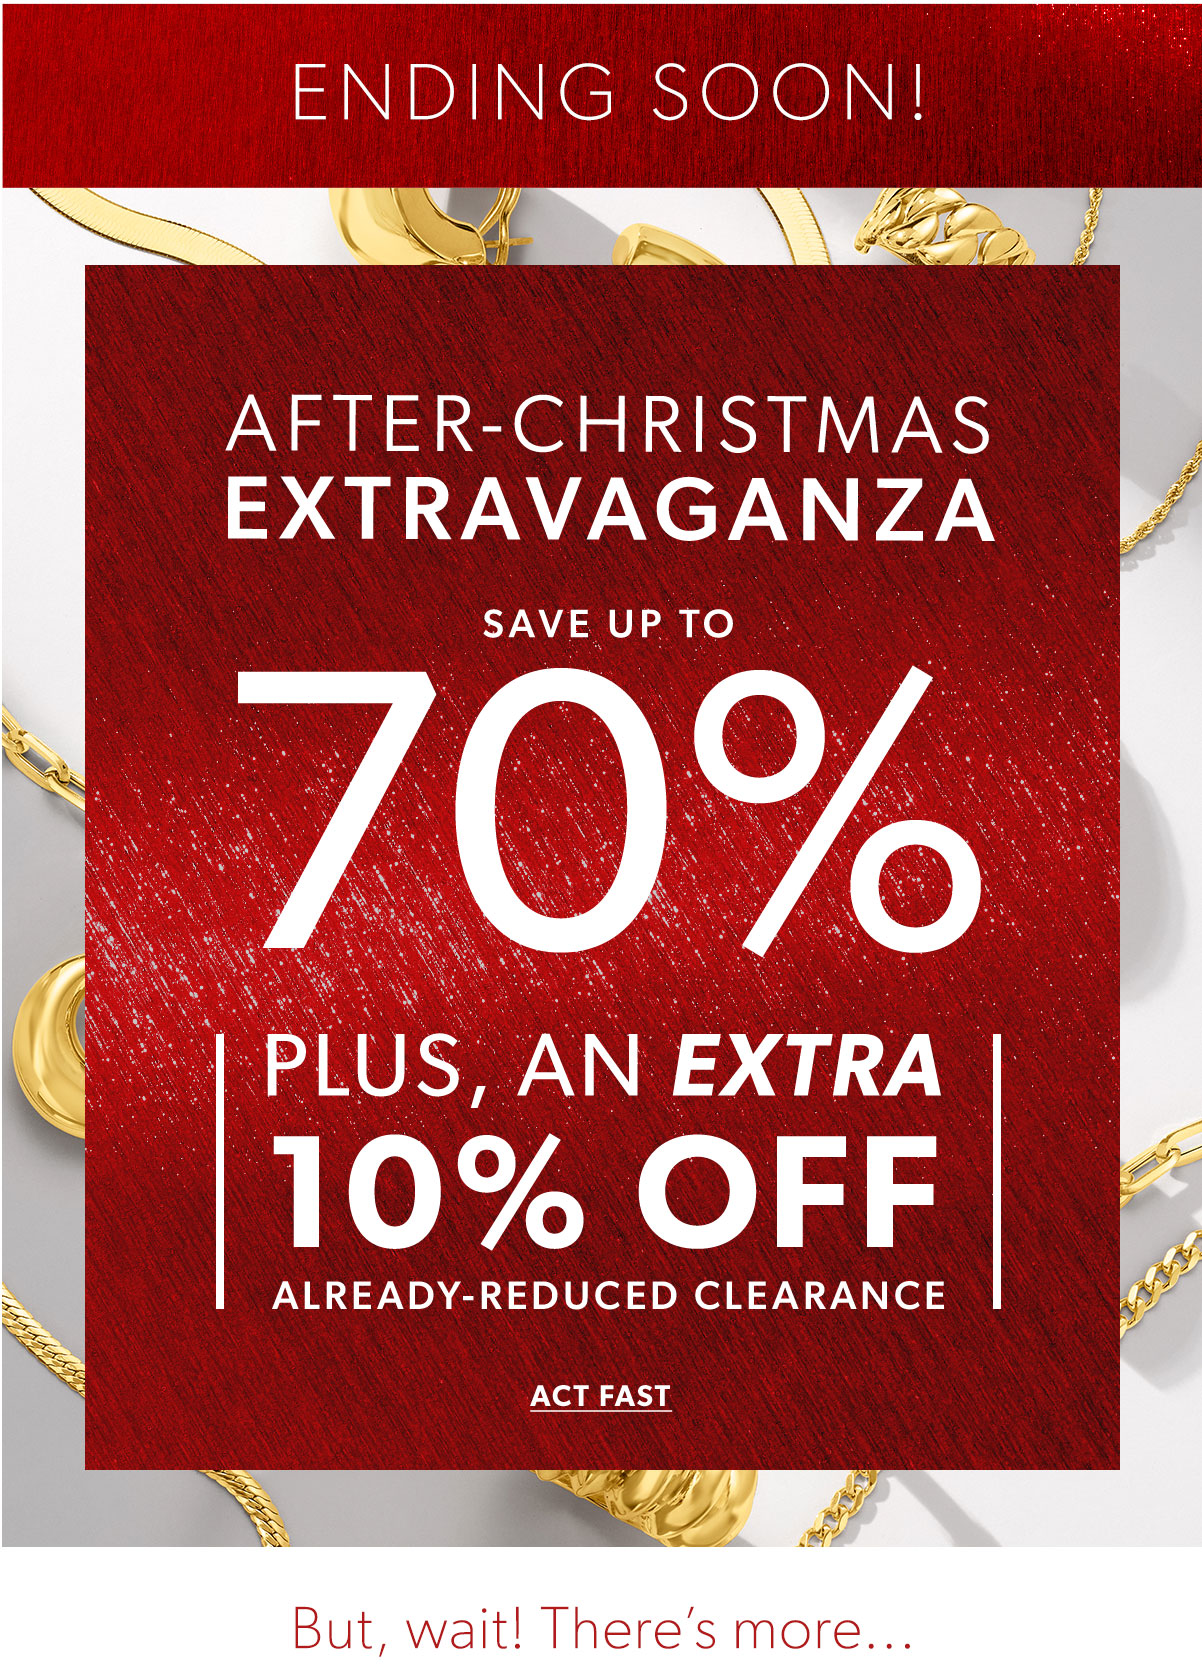 Ending Soon! After-Christmas Extravaganza. Save Up To 70% Plus, An Extra 10% Off Already-Reduced Clearance